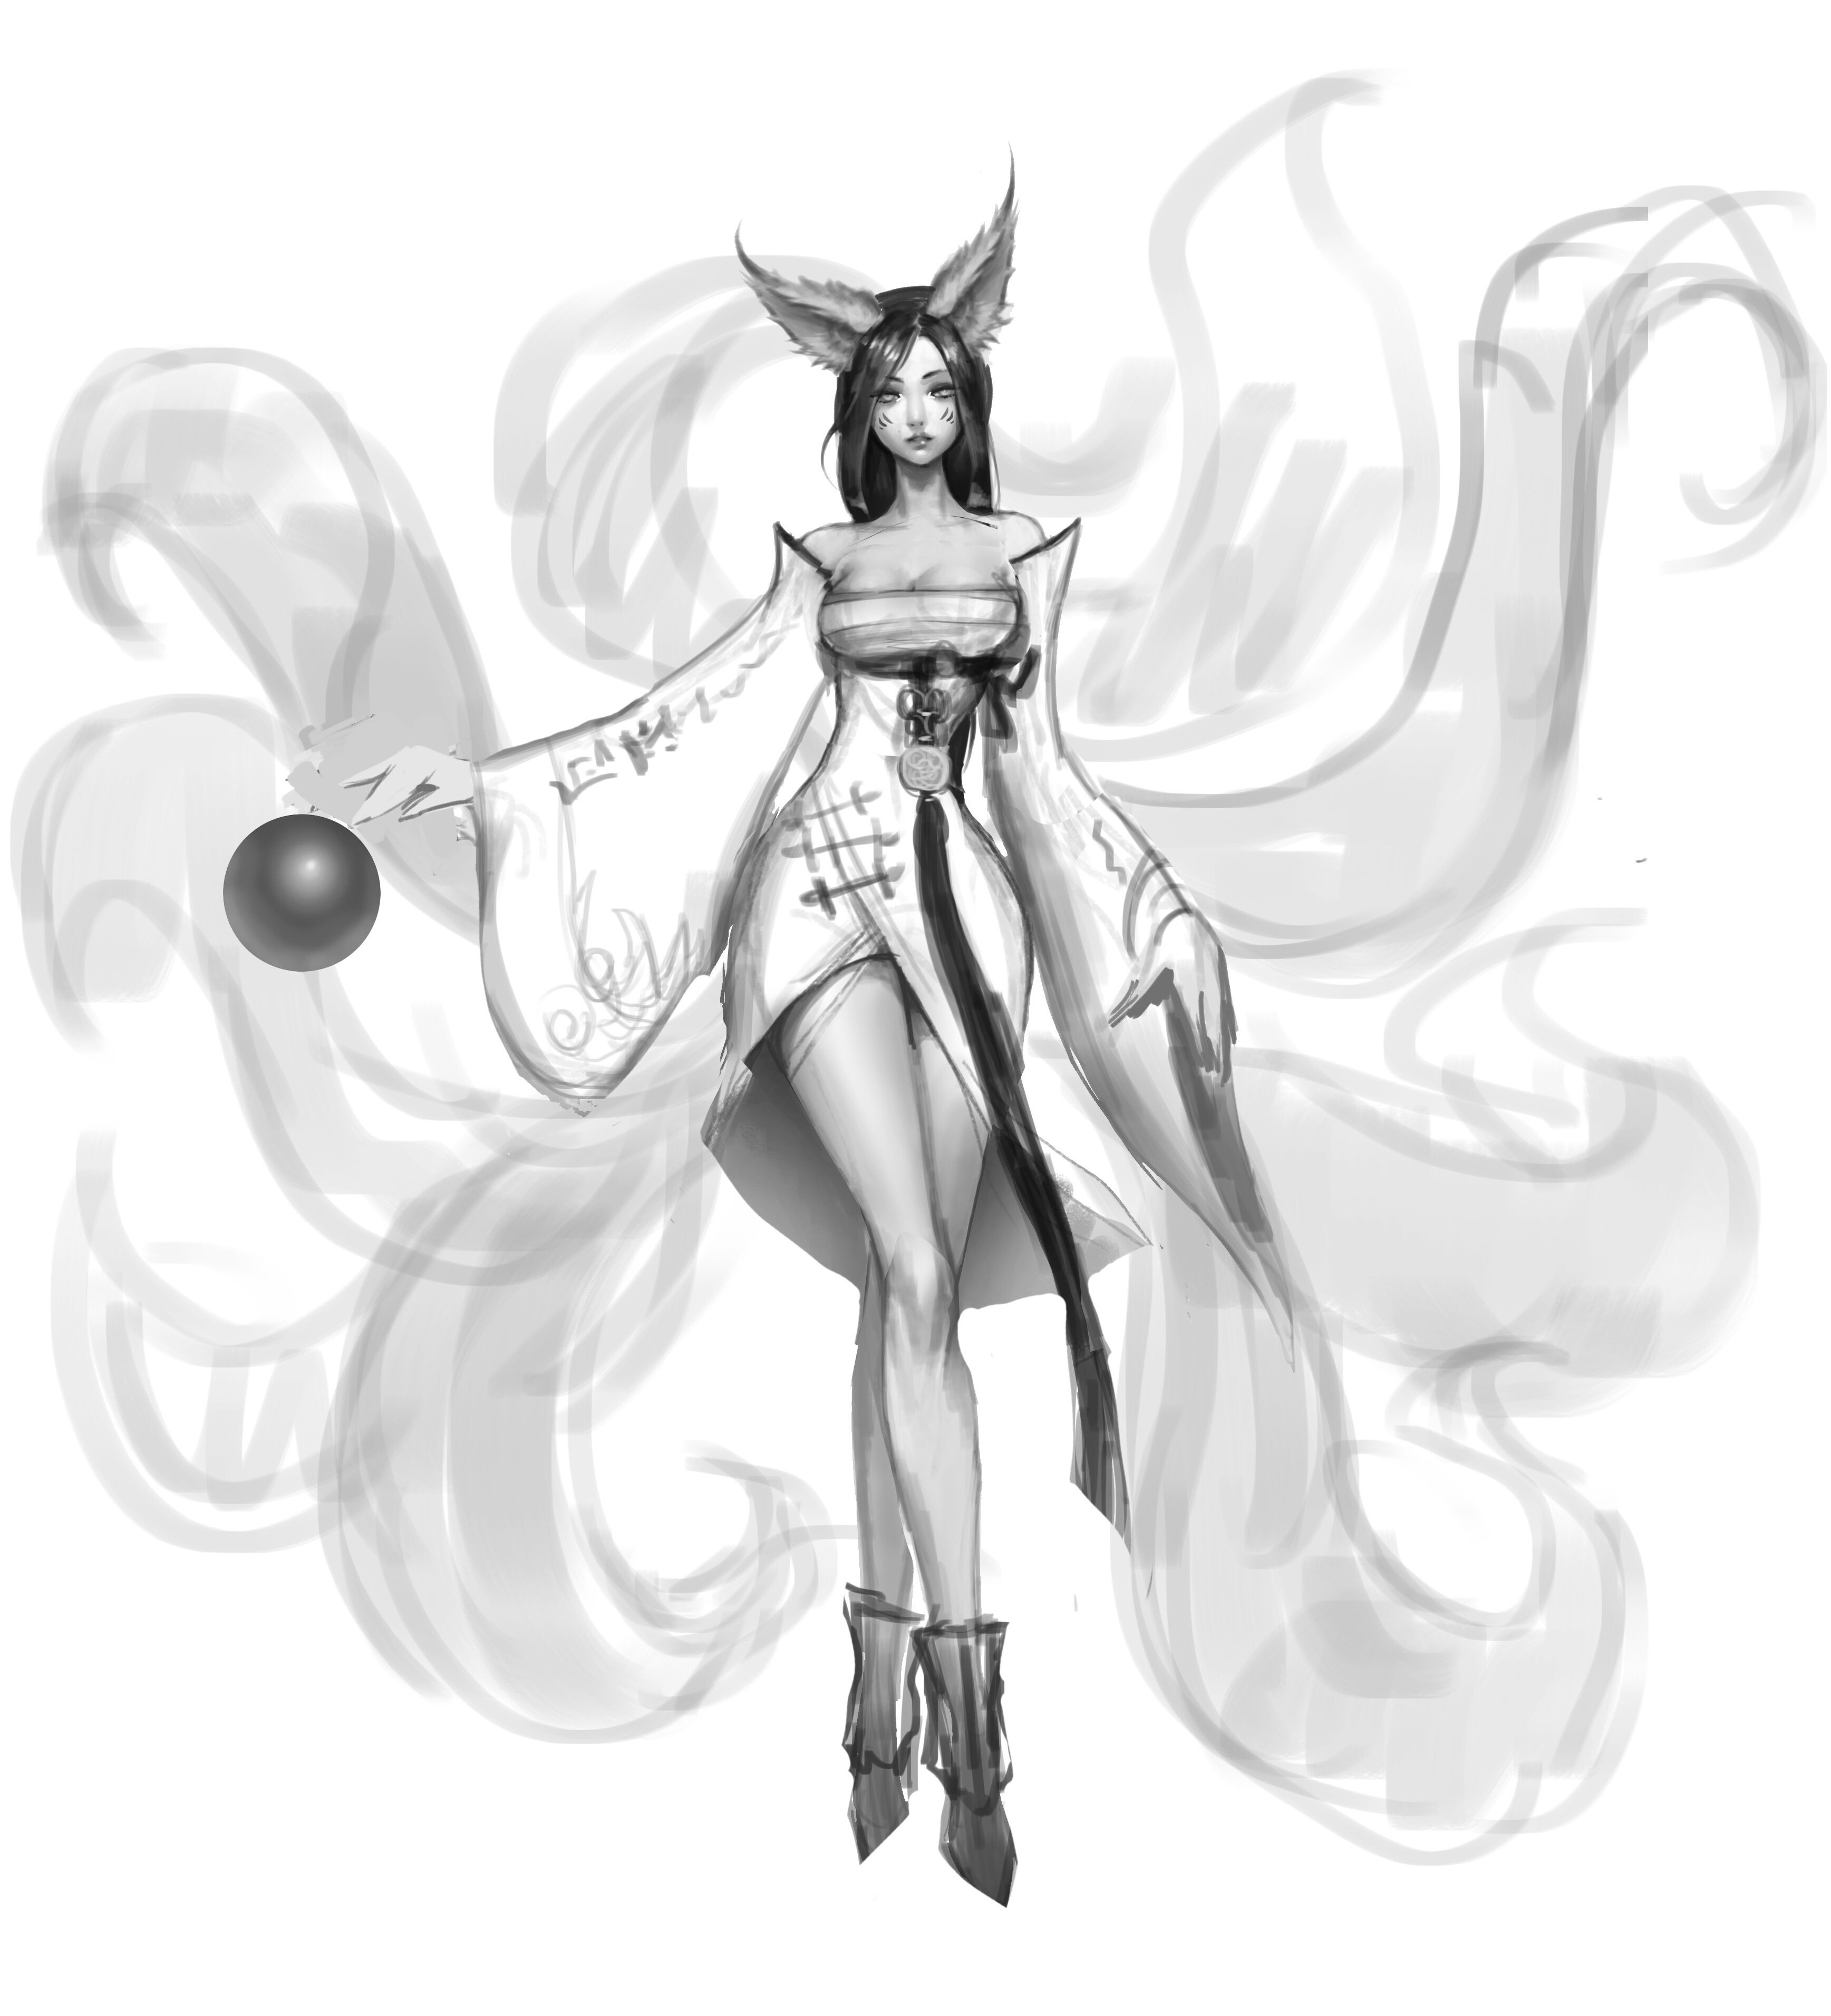 Ahri (Development): Ahri is a popular champion in the game League of Legends. If you\'re a fan of Ahri or interested in game development, check out this amazing image of Ahri in her development stage. You will get to see how game developers bring characters to life and make them ready for the battlefield.